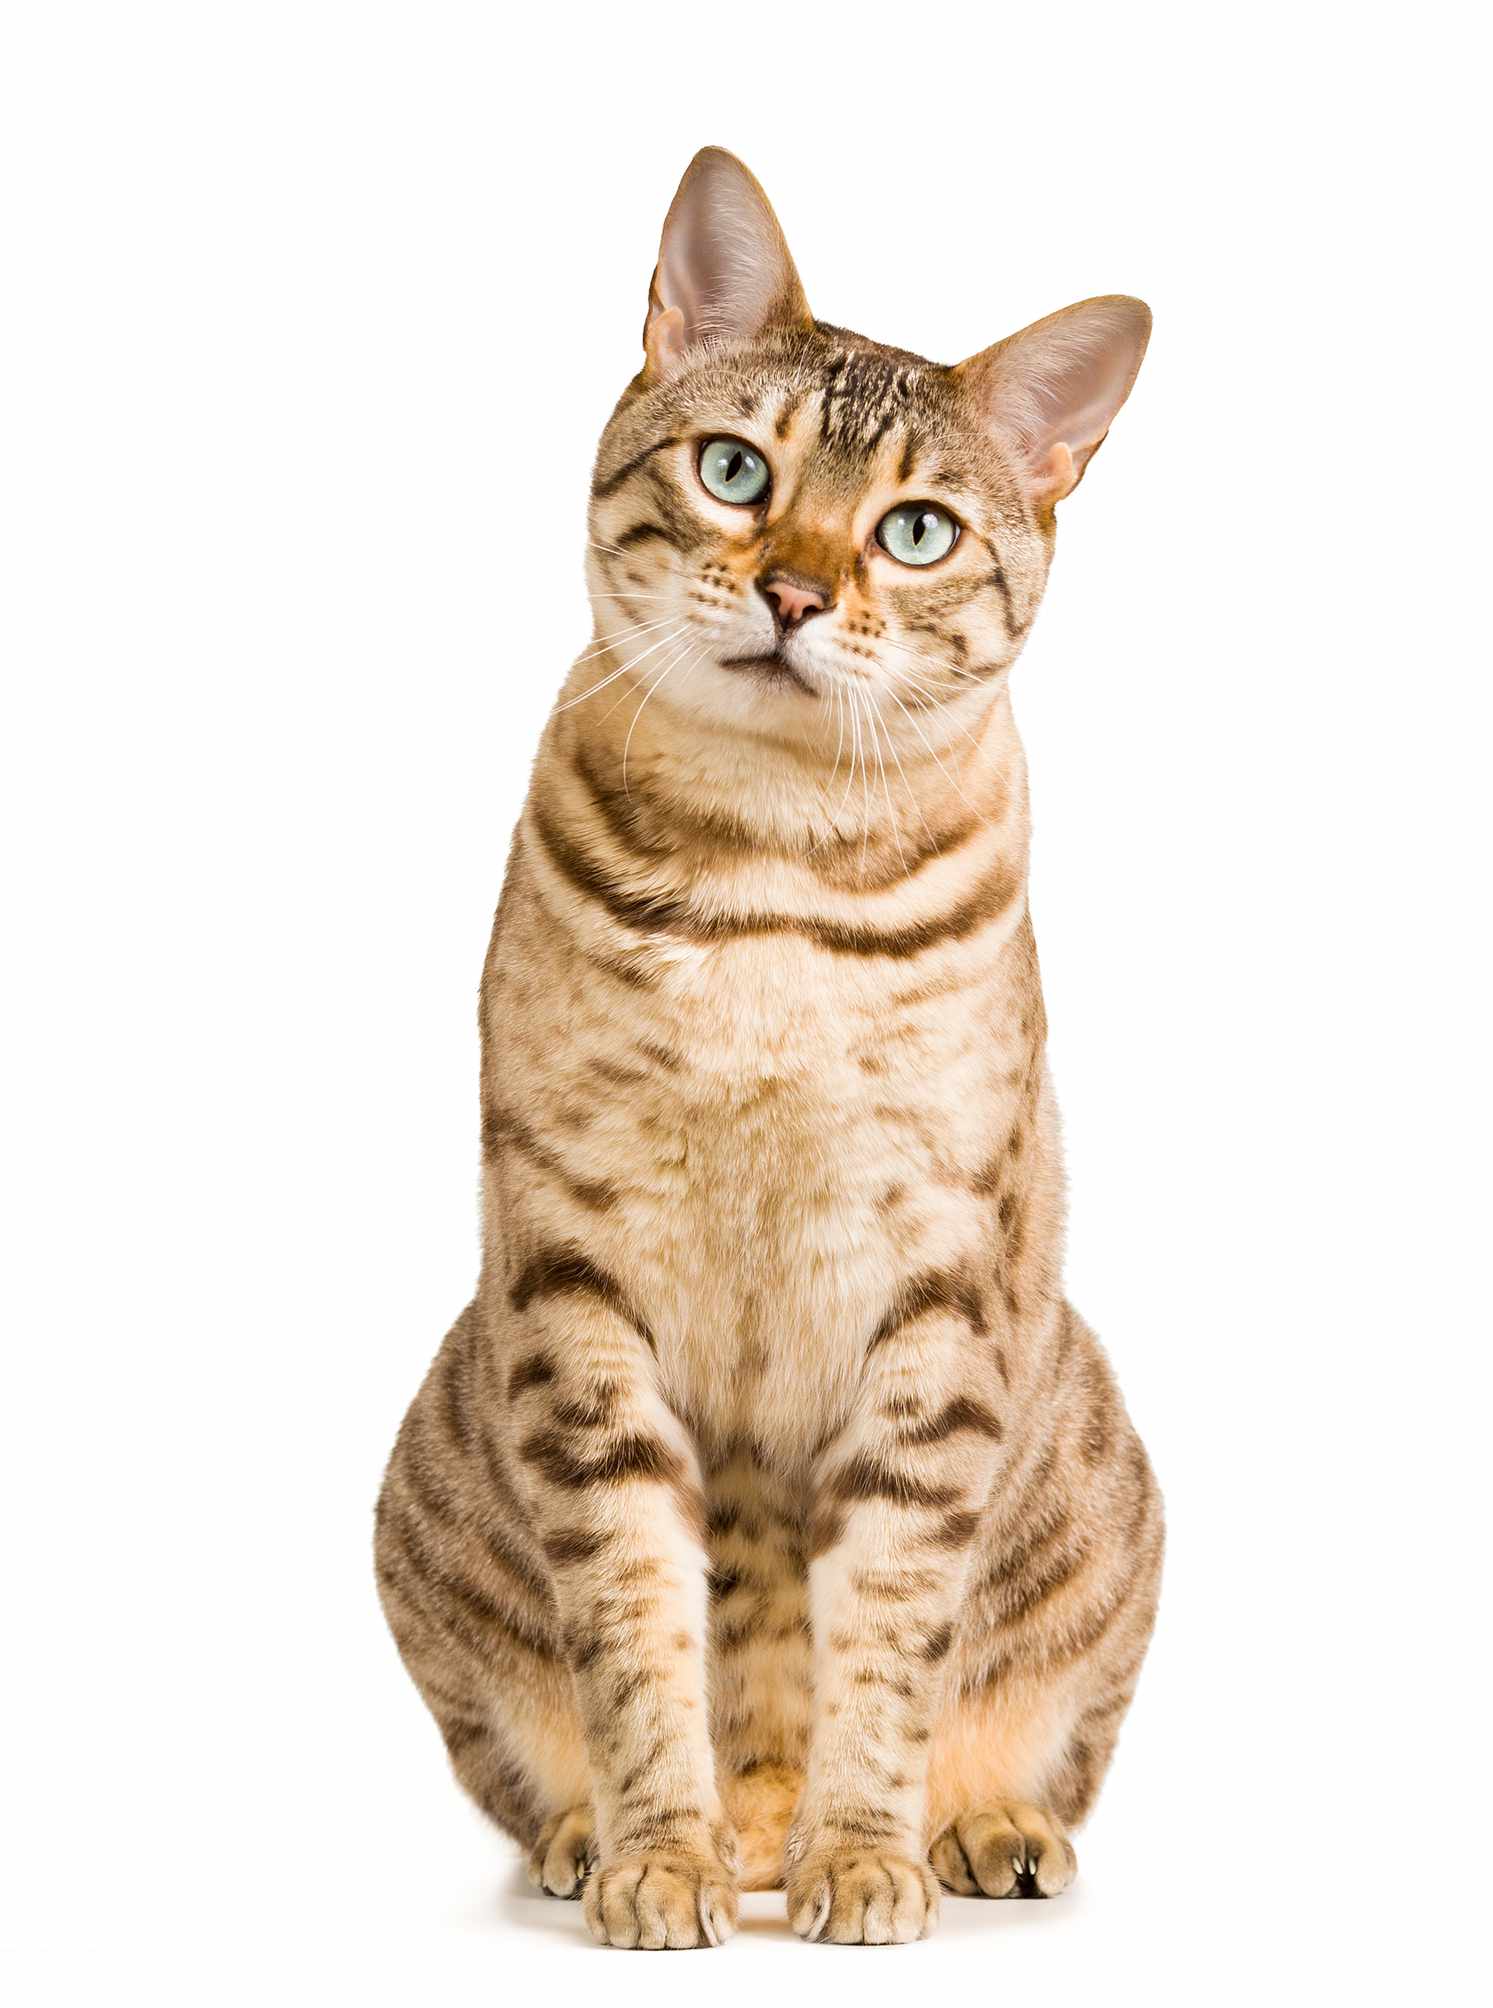 Cat sitting looking at camera on a white background